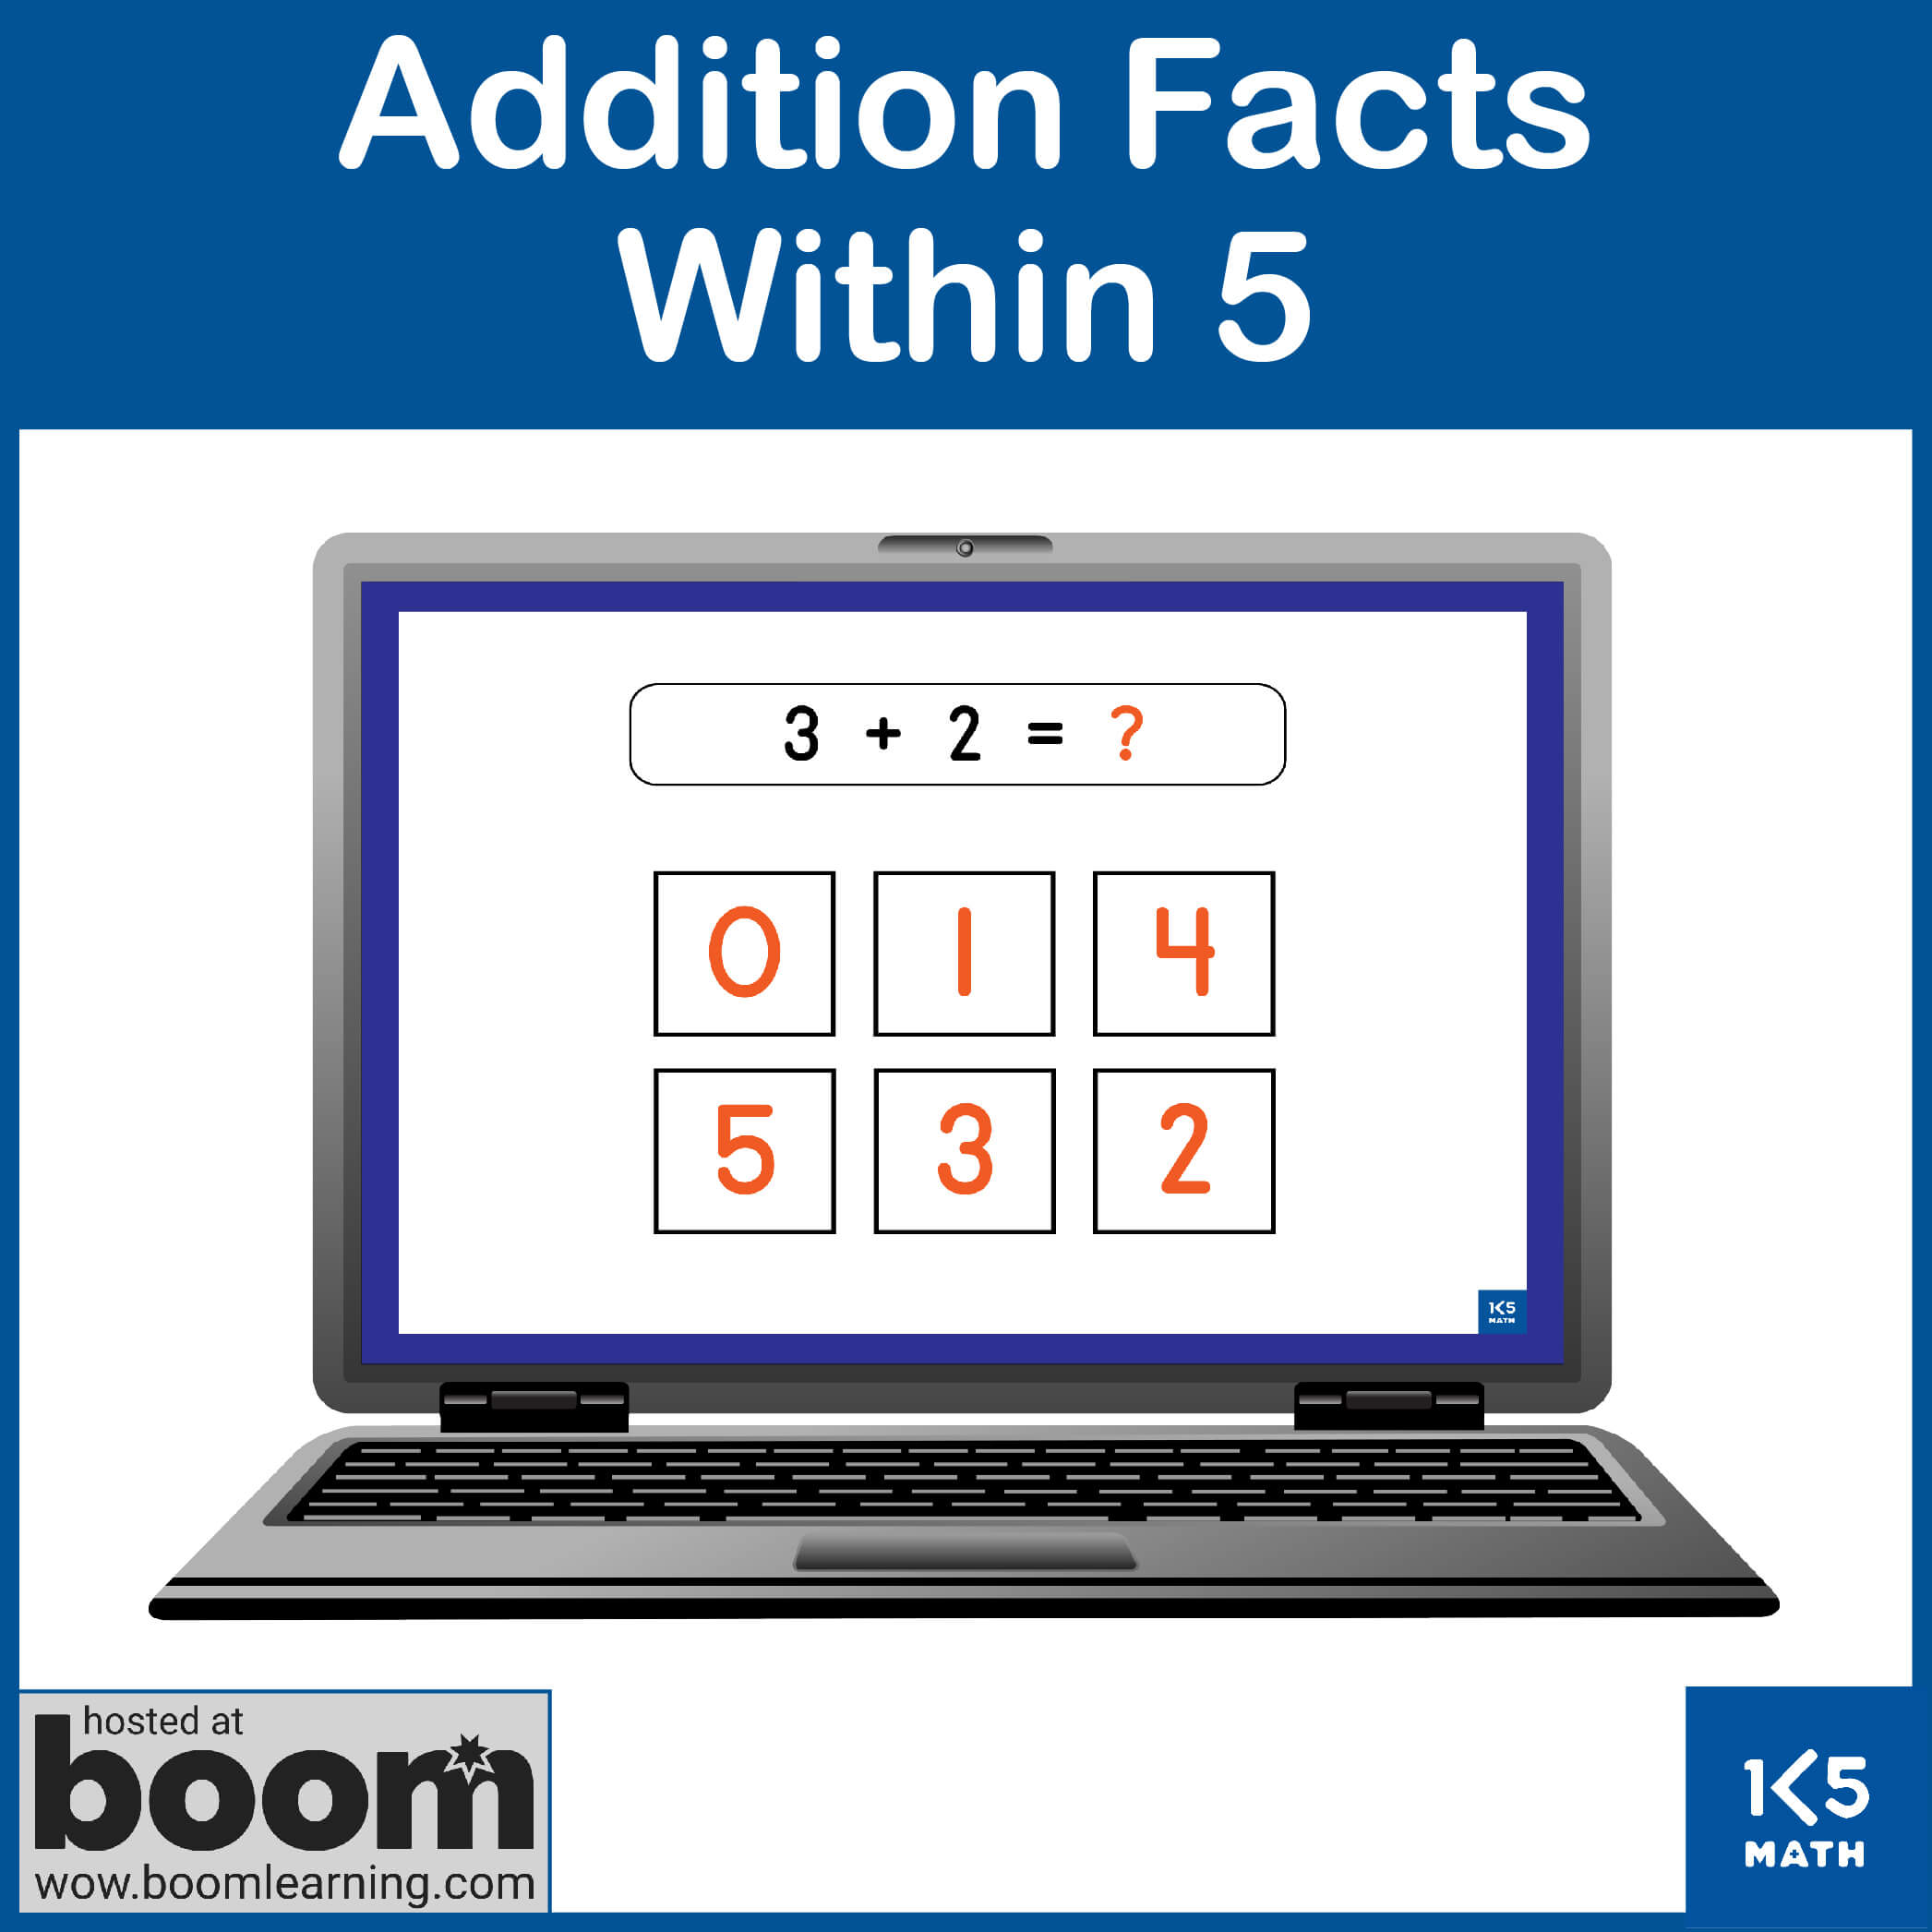 Boom Cards: Addition Facts within 5